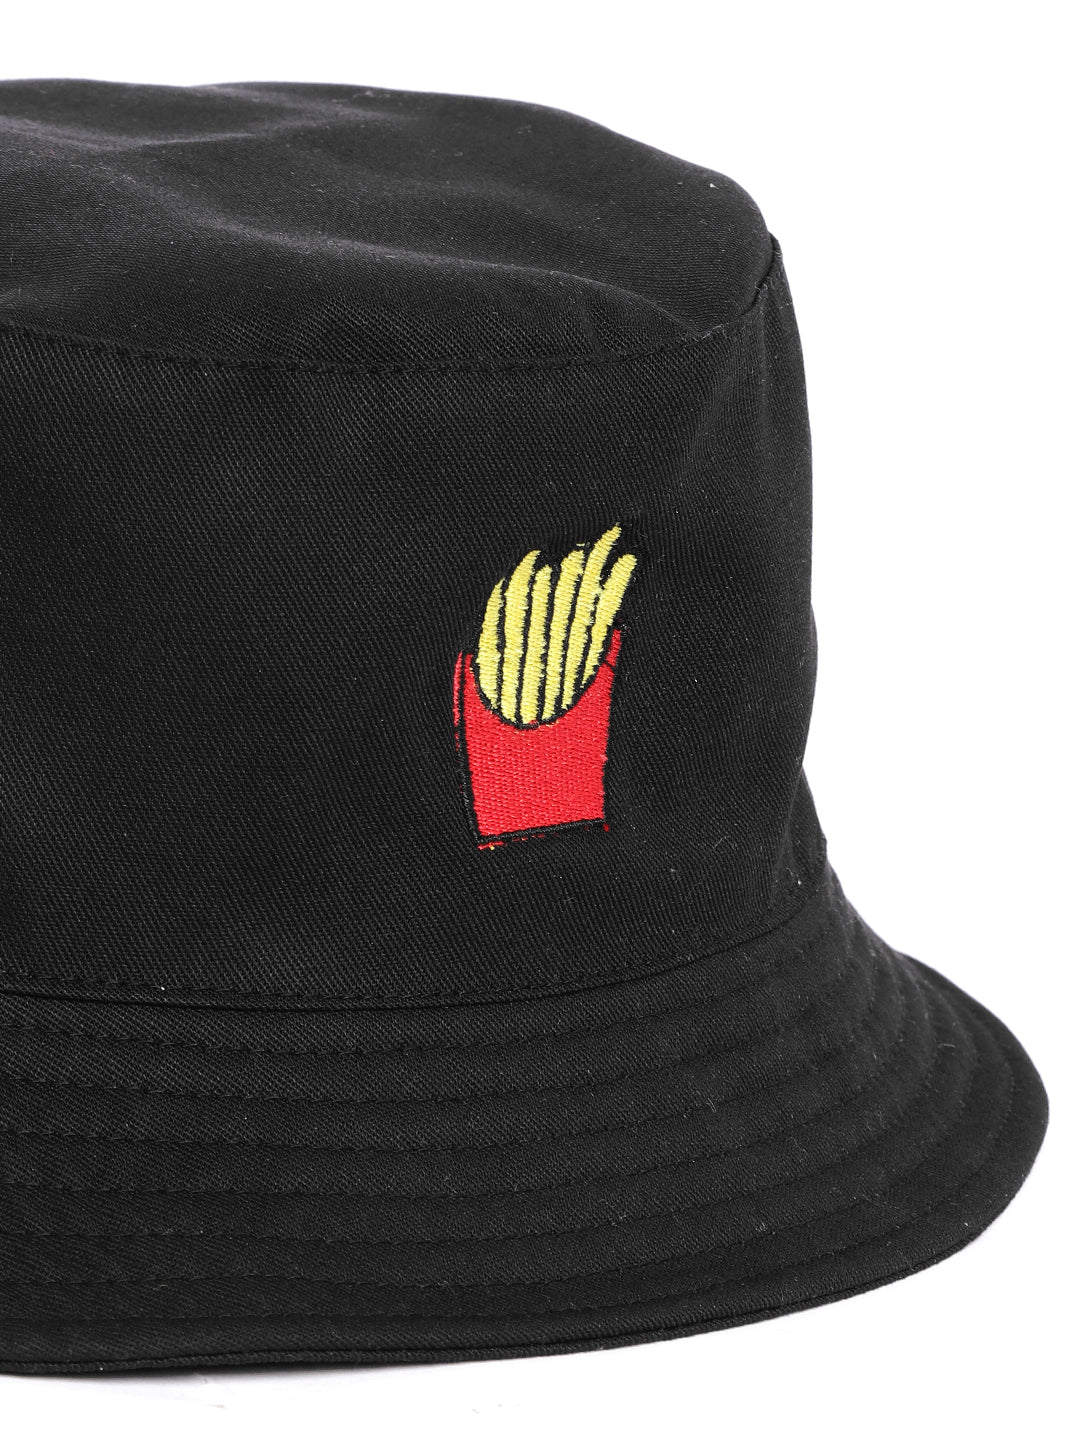 Blueberry Black french fries Reversible Embroidered bucket hat